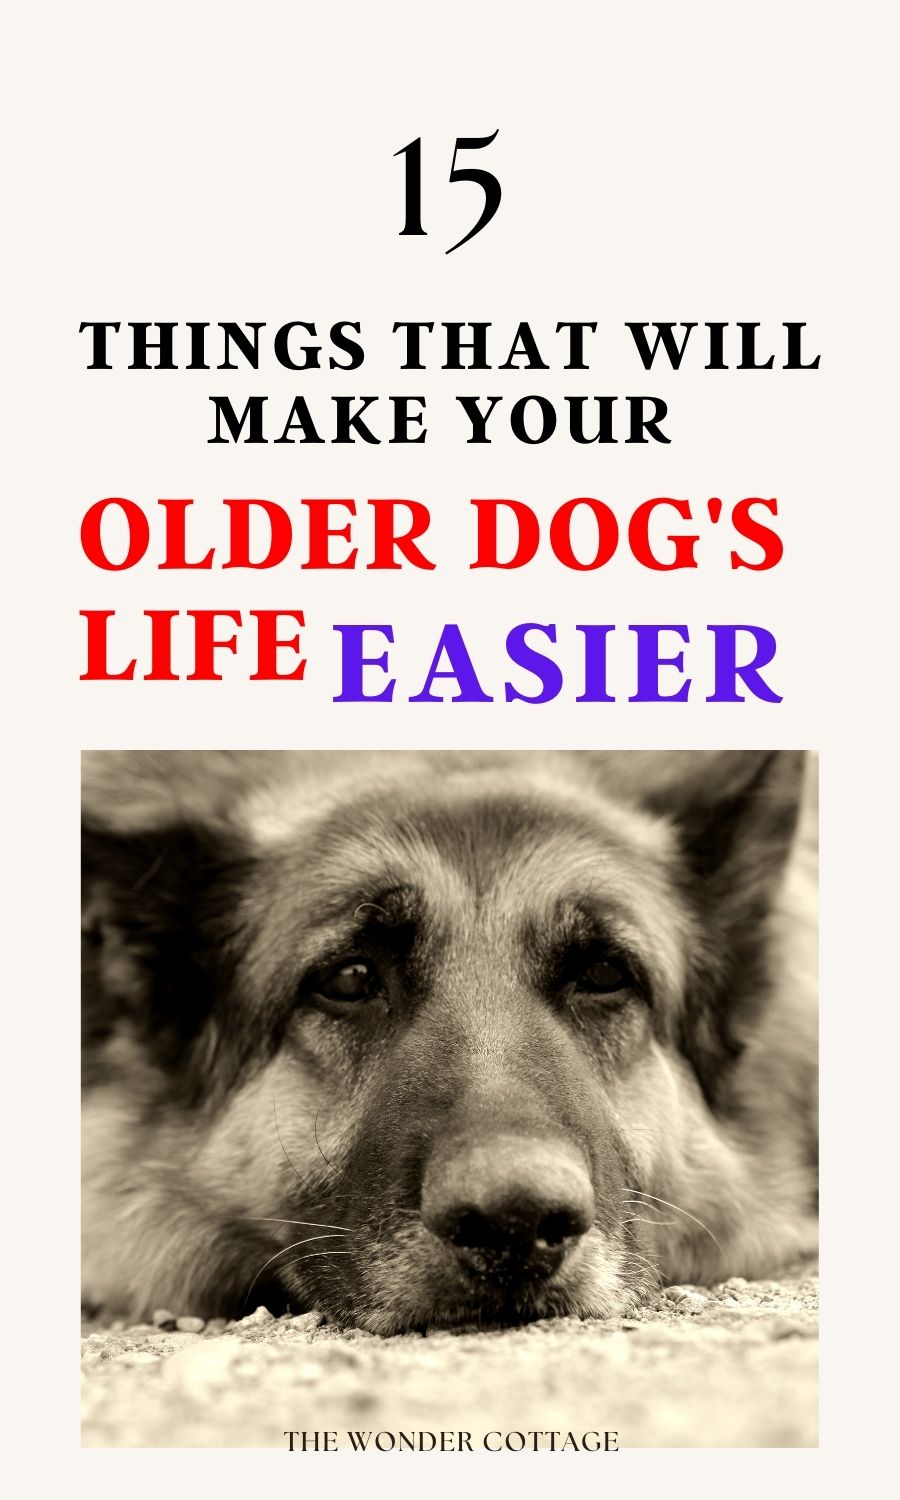 How to make your older dog's life easier